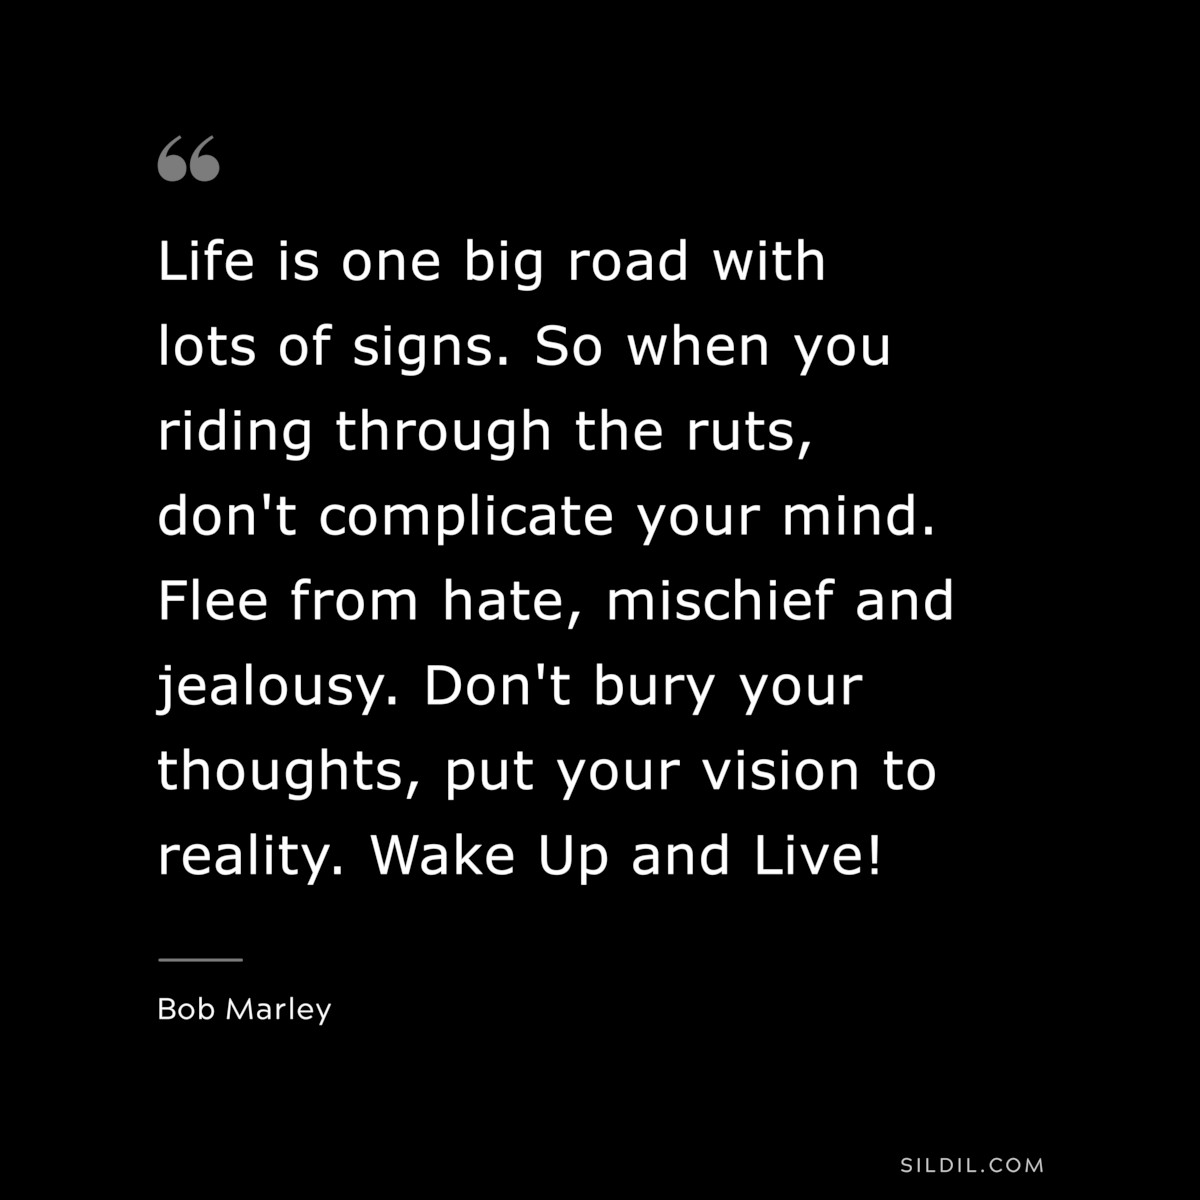 Life is one big road with lots of signs. So when you riding through the ruts, don't complicate your mind. Flee from hate, mischief and jealousy. Don't bury your thoughts, put your vision to reality. Wake Up and Live! ― Bob Marley